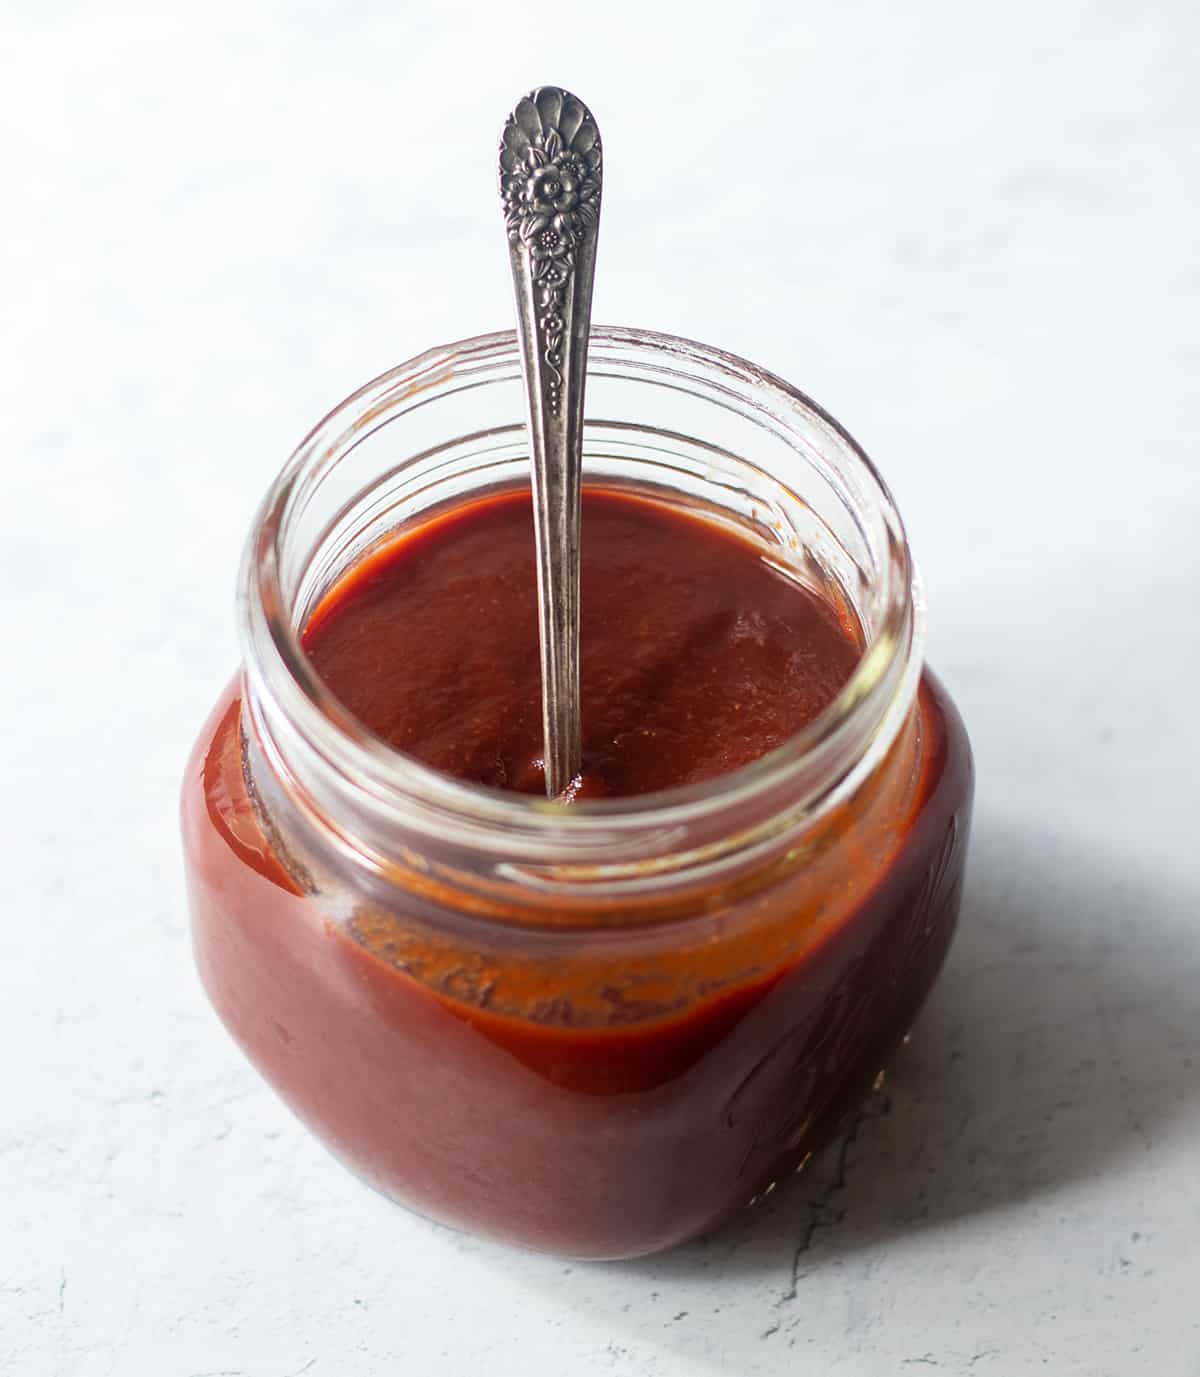 Homemade barbecue sauce in a clear glass jar with a silver spoon